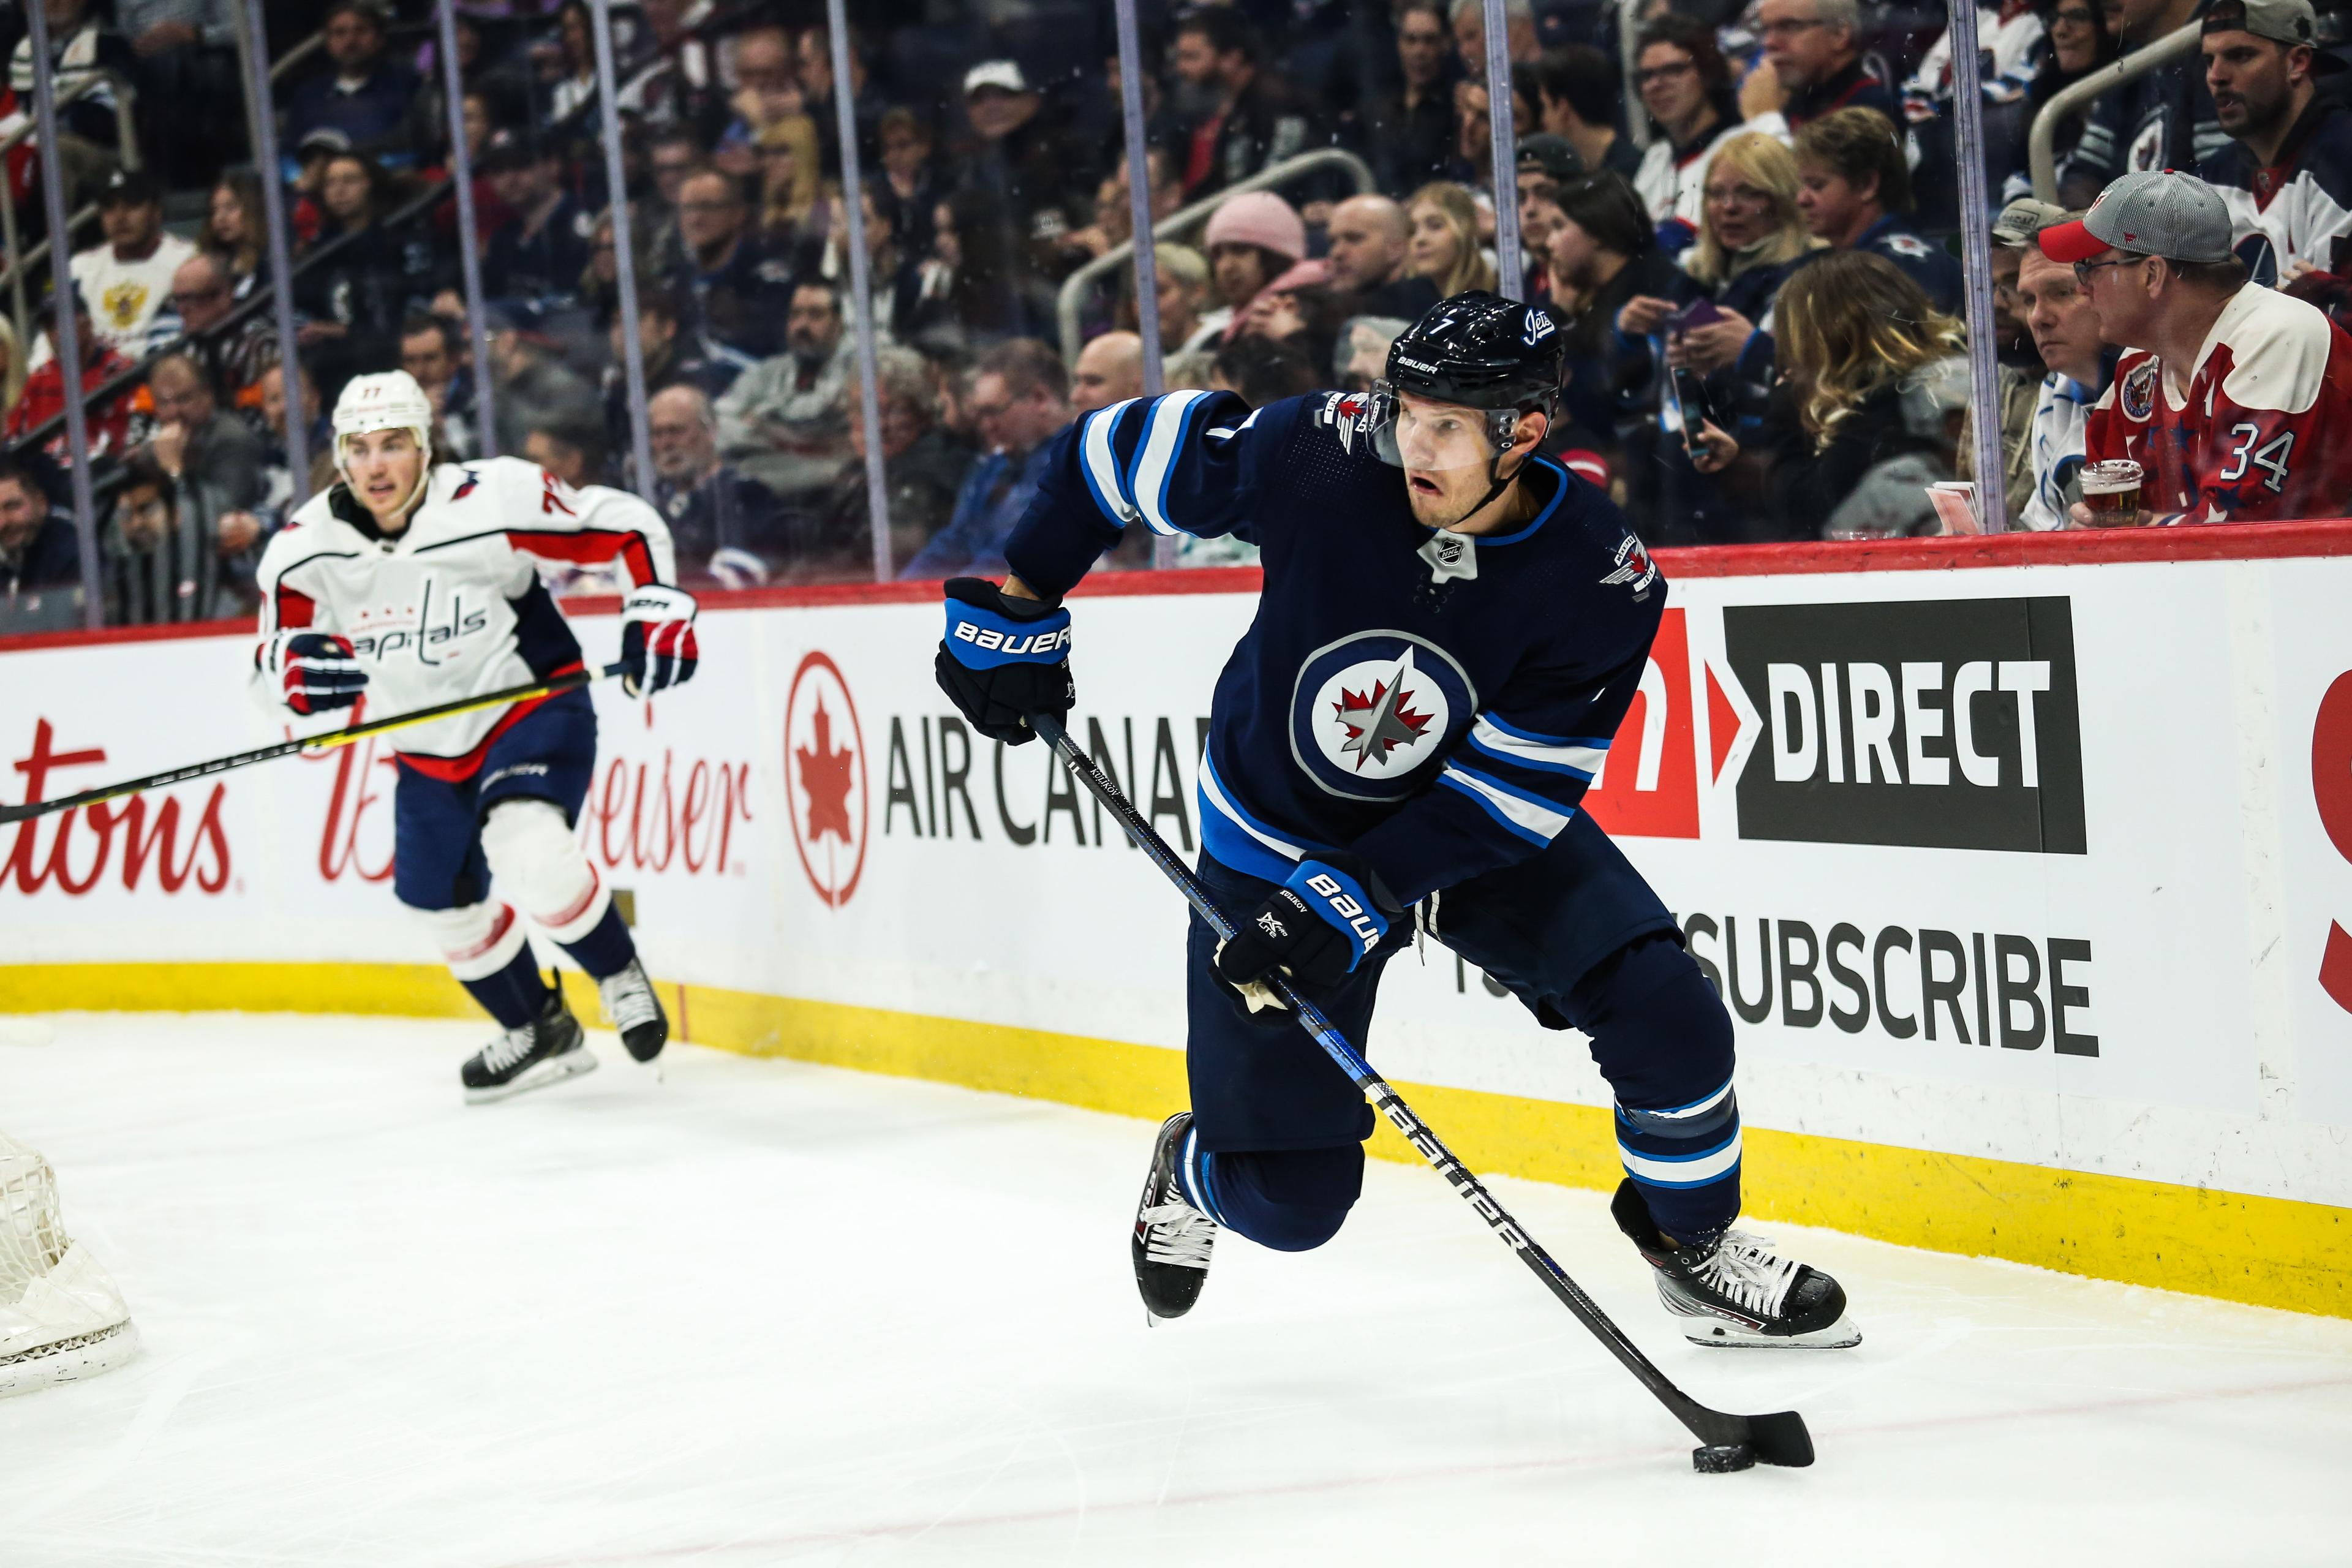 Winnipeg Jets defenseman Dmitry Kulikov (7) looks lo make a pass against the Washington Capitals during the first period at Bell MTS Place. / Terrence Lee - USA Today Sports